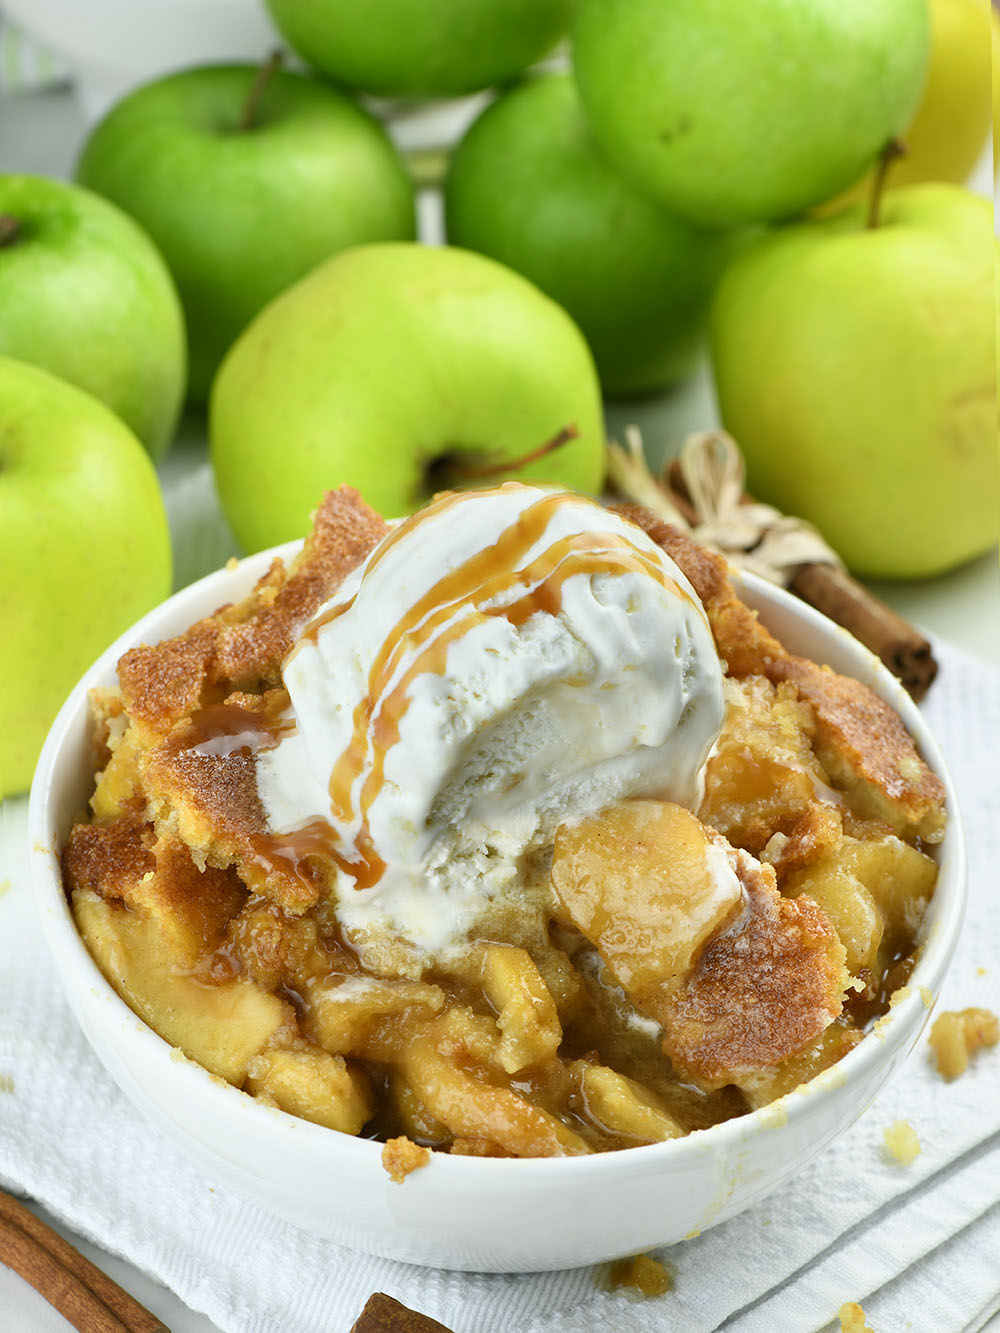 Apple Cobbler in a white bowl decorated with a large scoop of ice cream, in front of a pile of green apples.